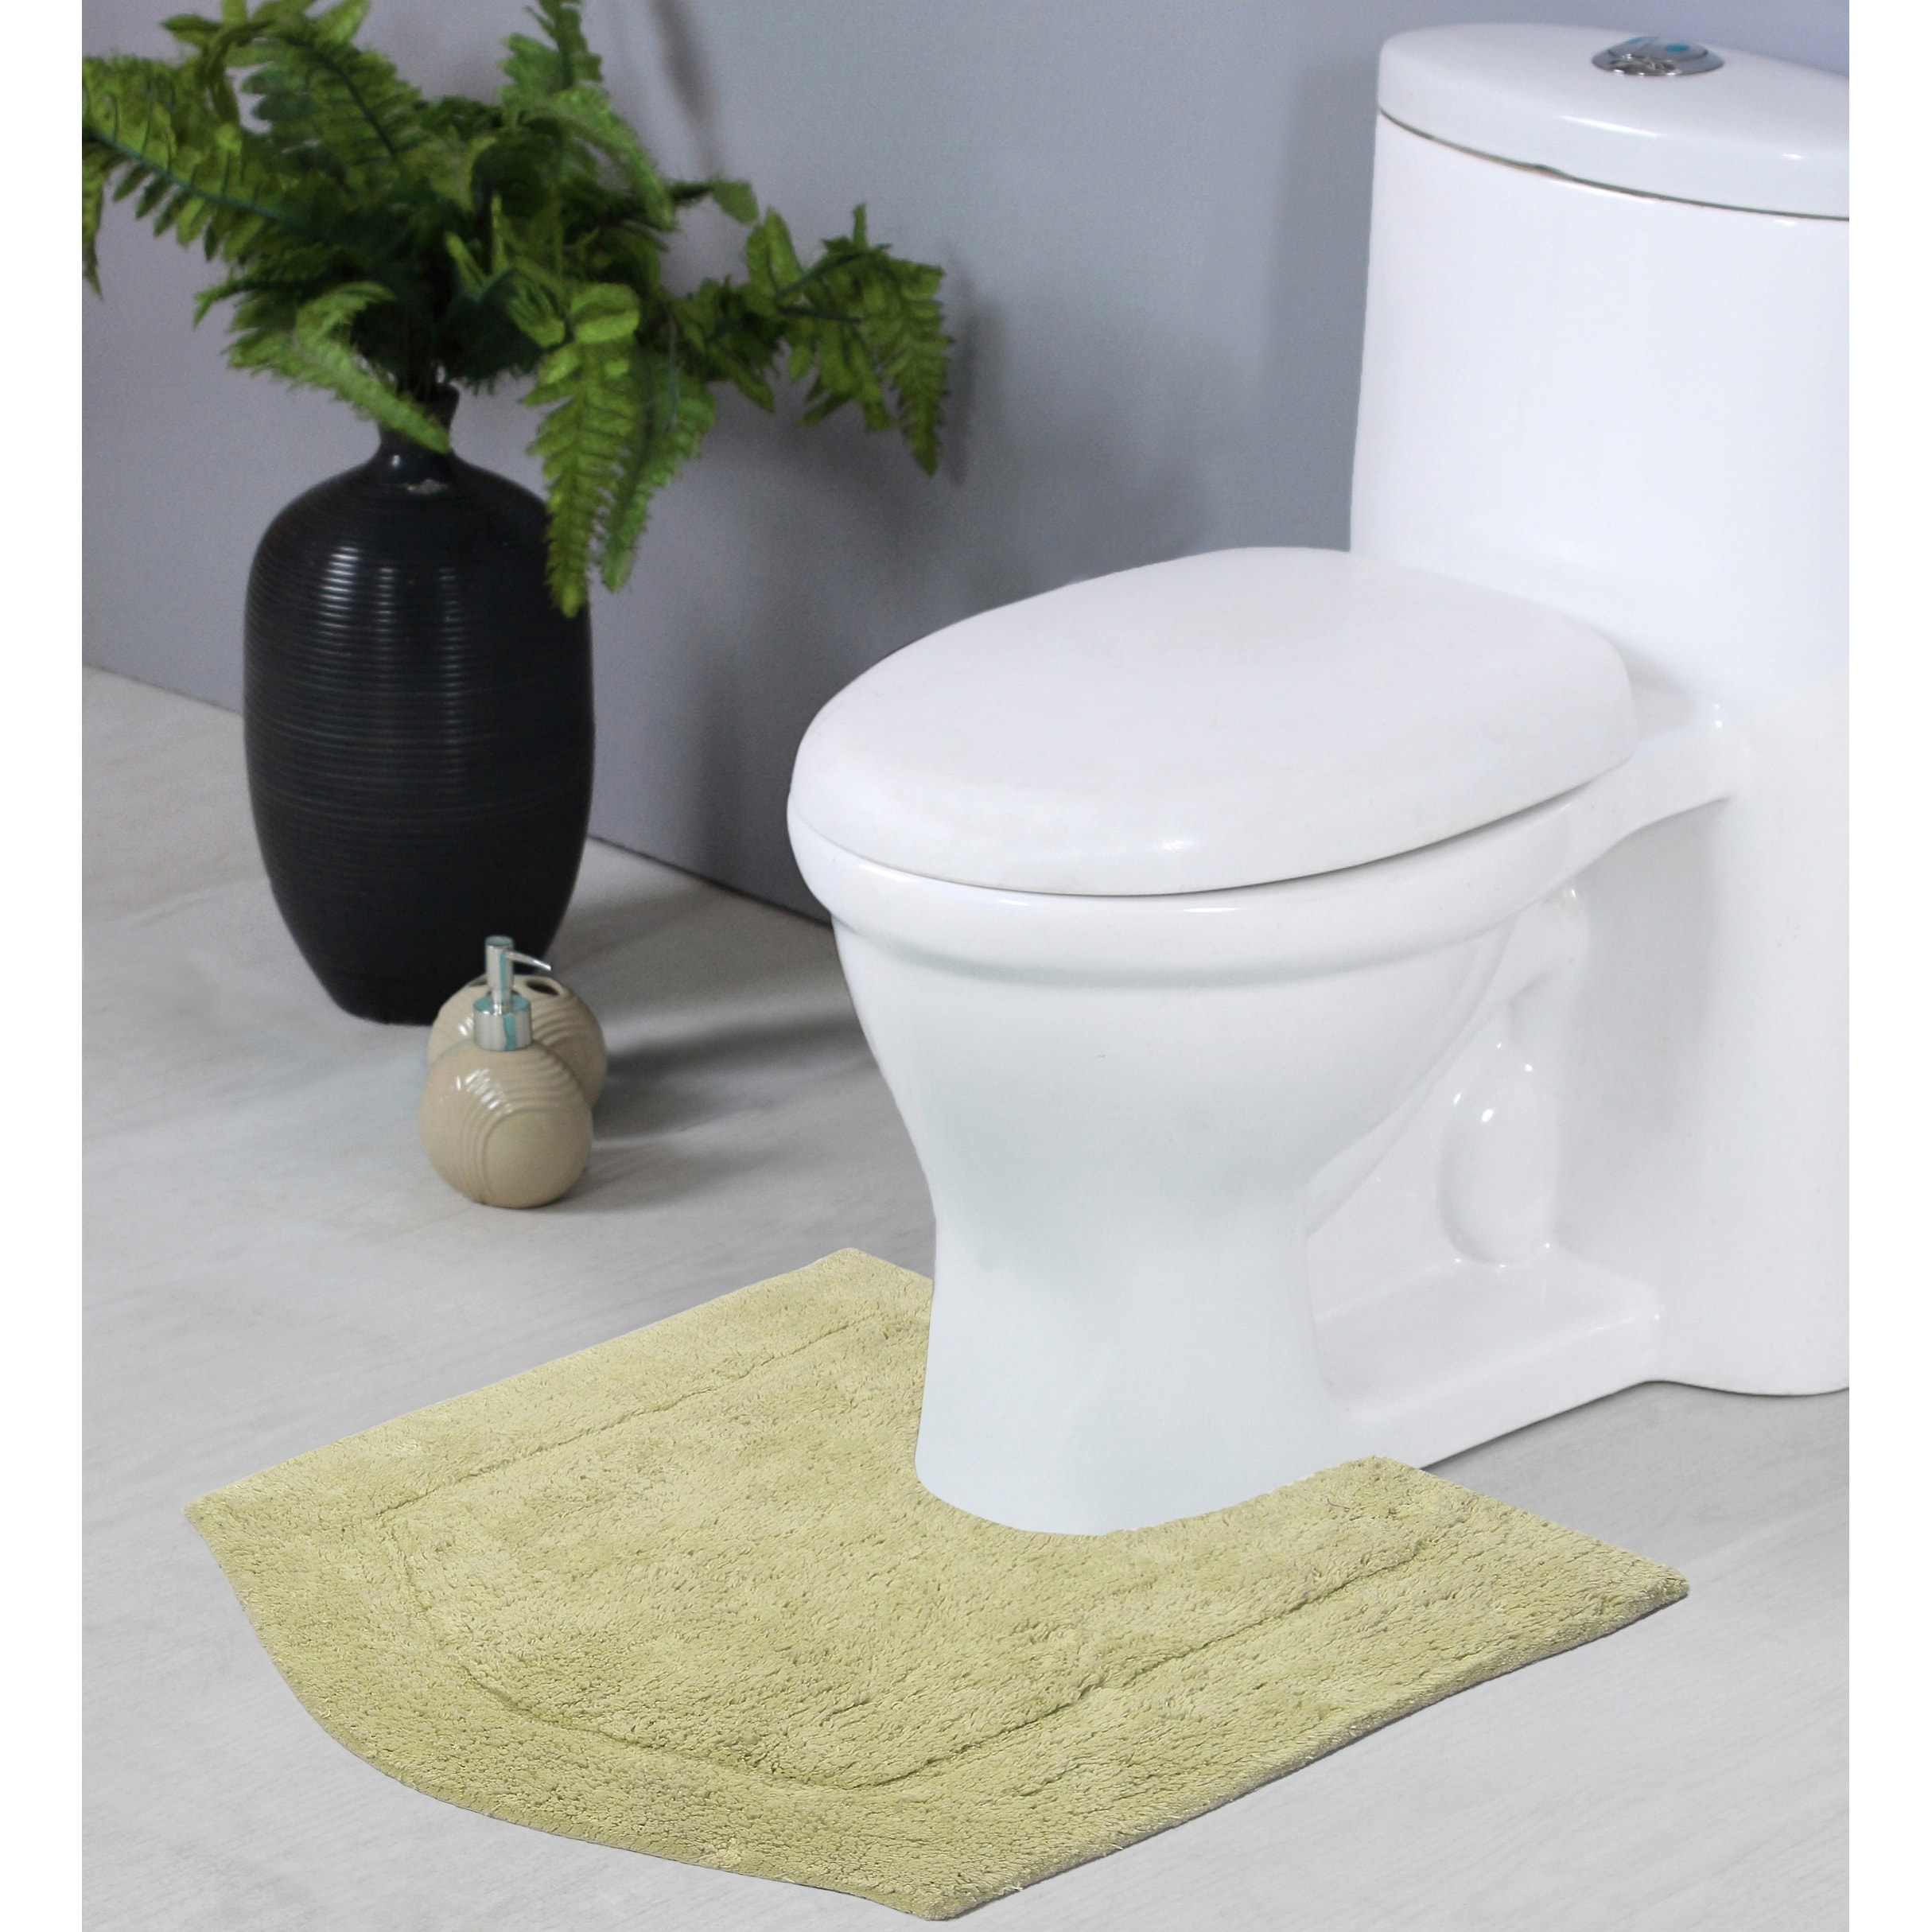 https://ak1.ostkcdn.com/images/products/is/images/direct/daf7d0c38acf8f9bfc57c5753314a2a5b63e05ca/Home-Weavers-WatreFord-Collection-Thick-Toilet-Bath-Rugs-U-Shaped-Contour-Non-Slip-Cotton-Soft-Absorbe-Machine-Washable-20%22x20%22.jpg